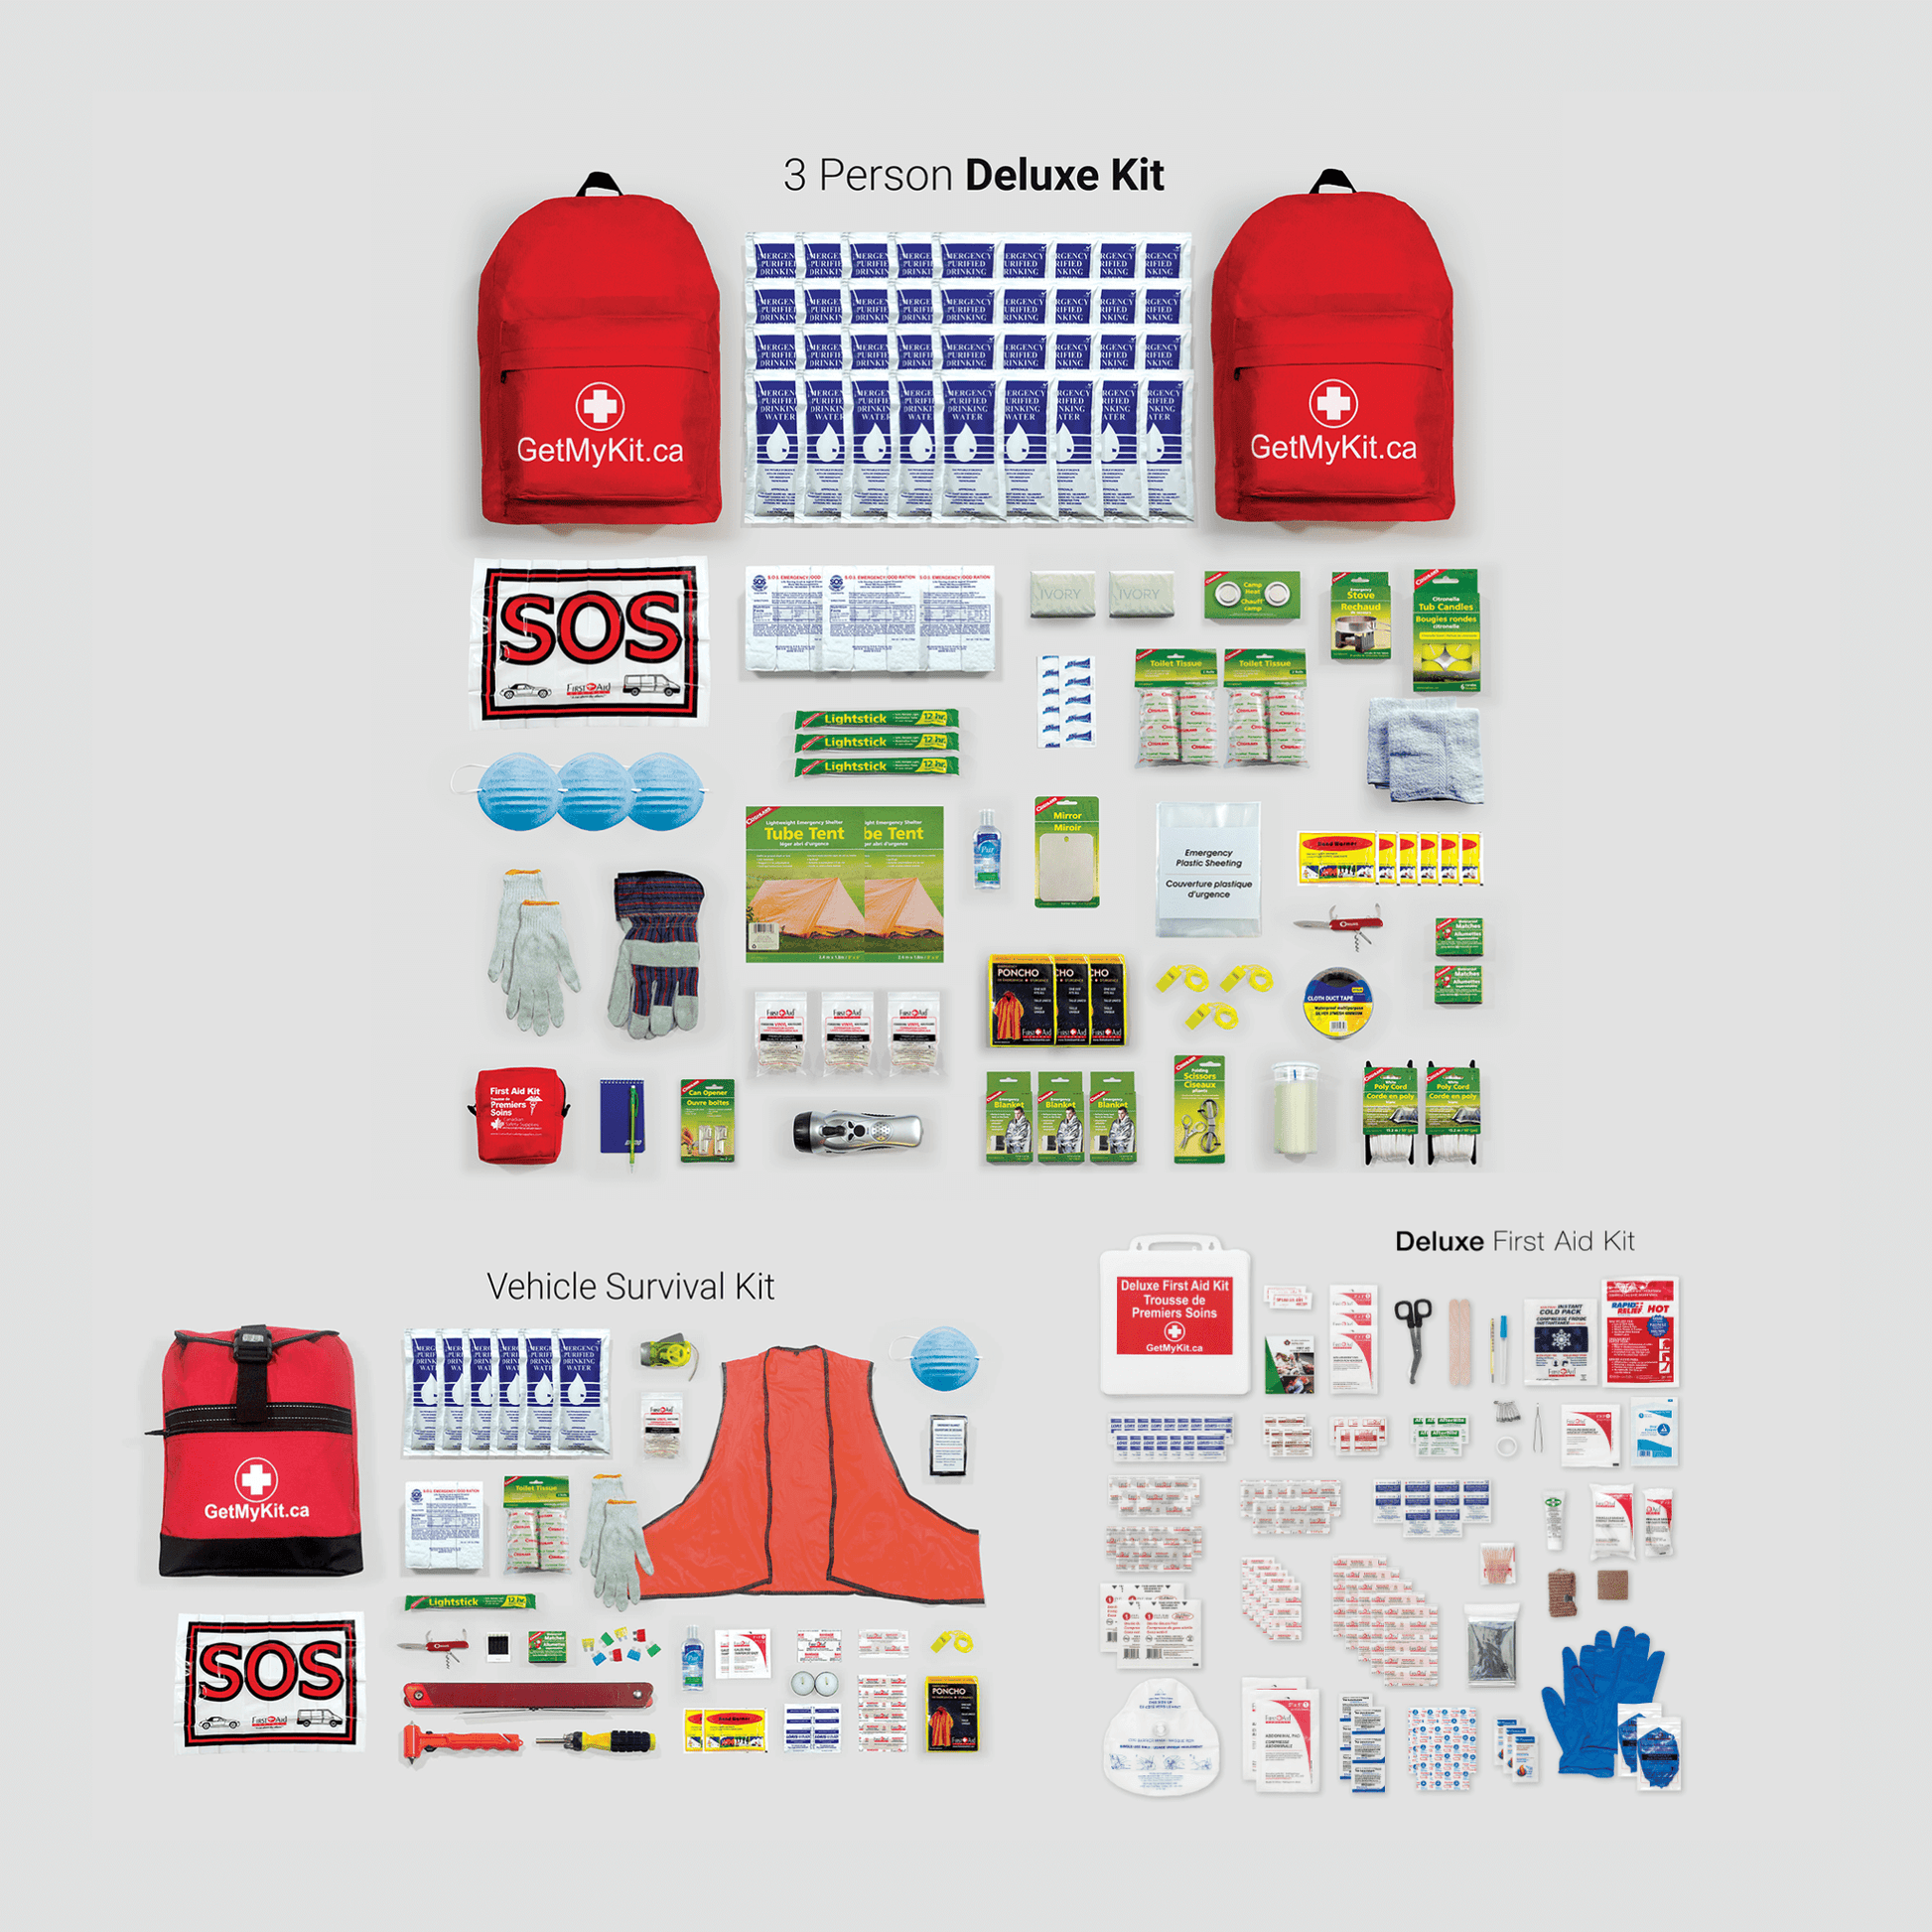 Three person deluxe emergency supply value pack. Contains earthquake kit, first aid kit, and vehicle survival kit